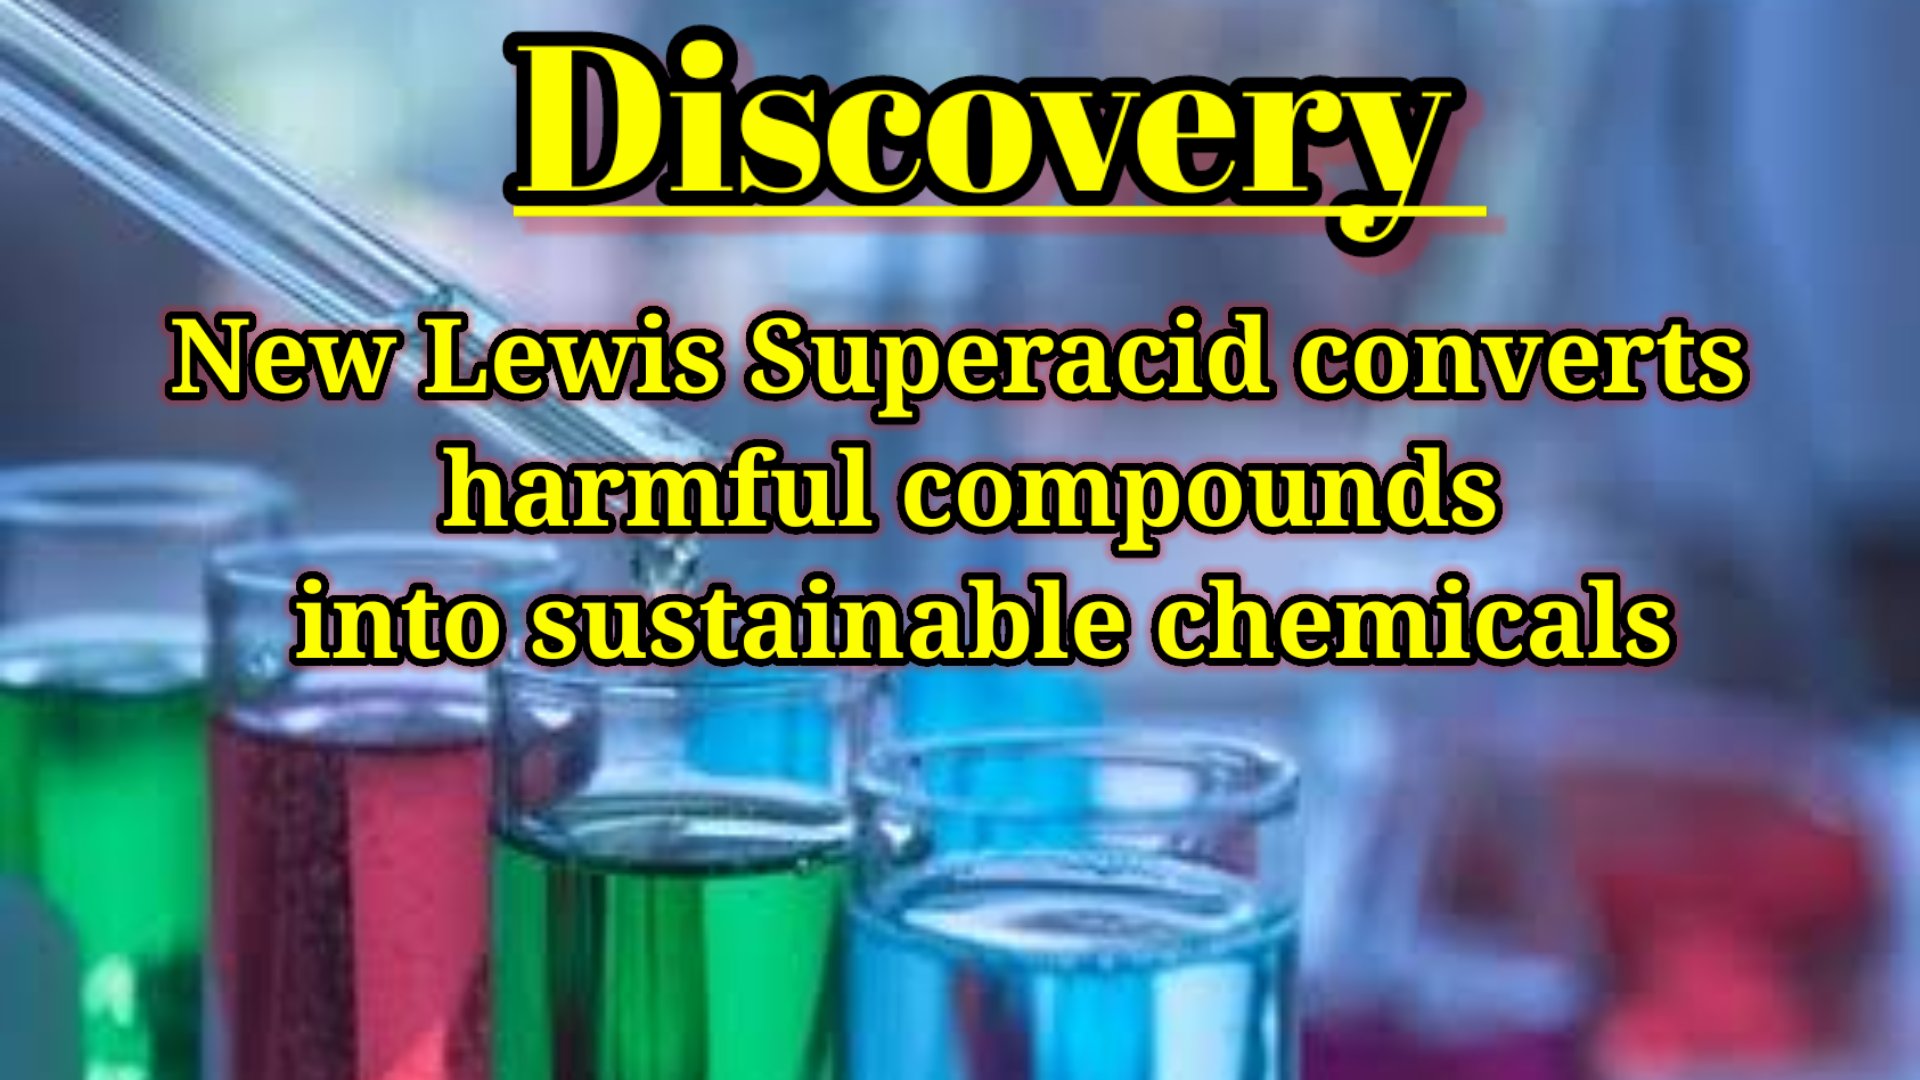 New Lewis Superacid converts harmful compounds into sustainable chemicals